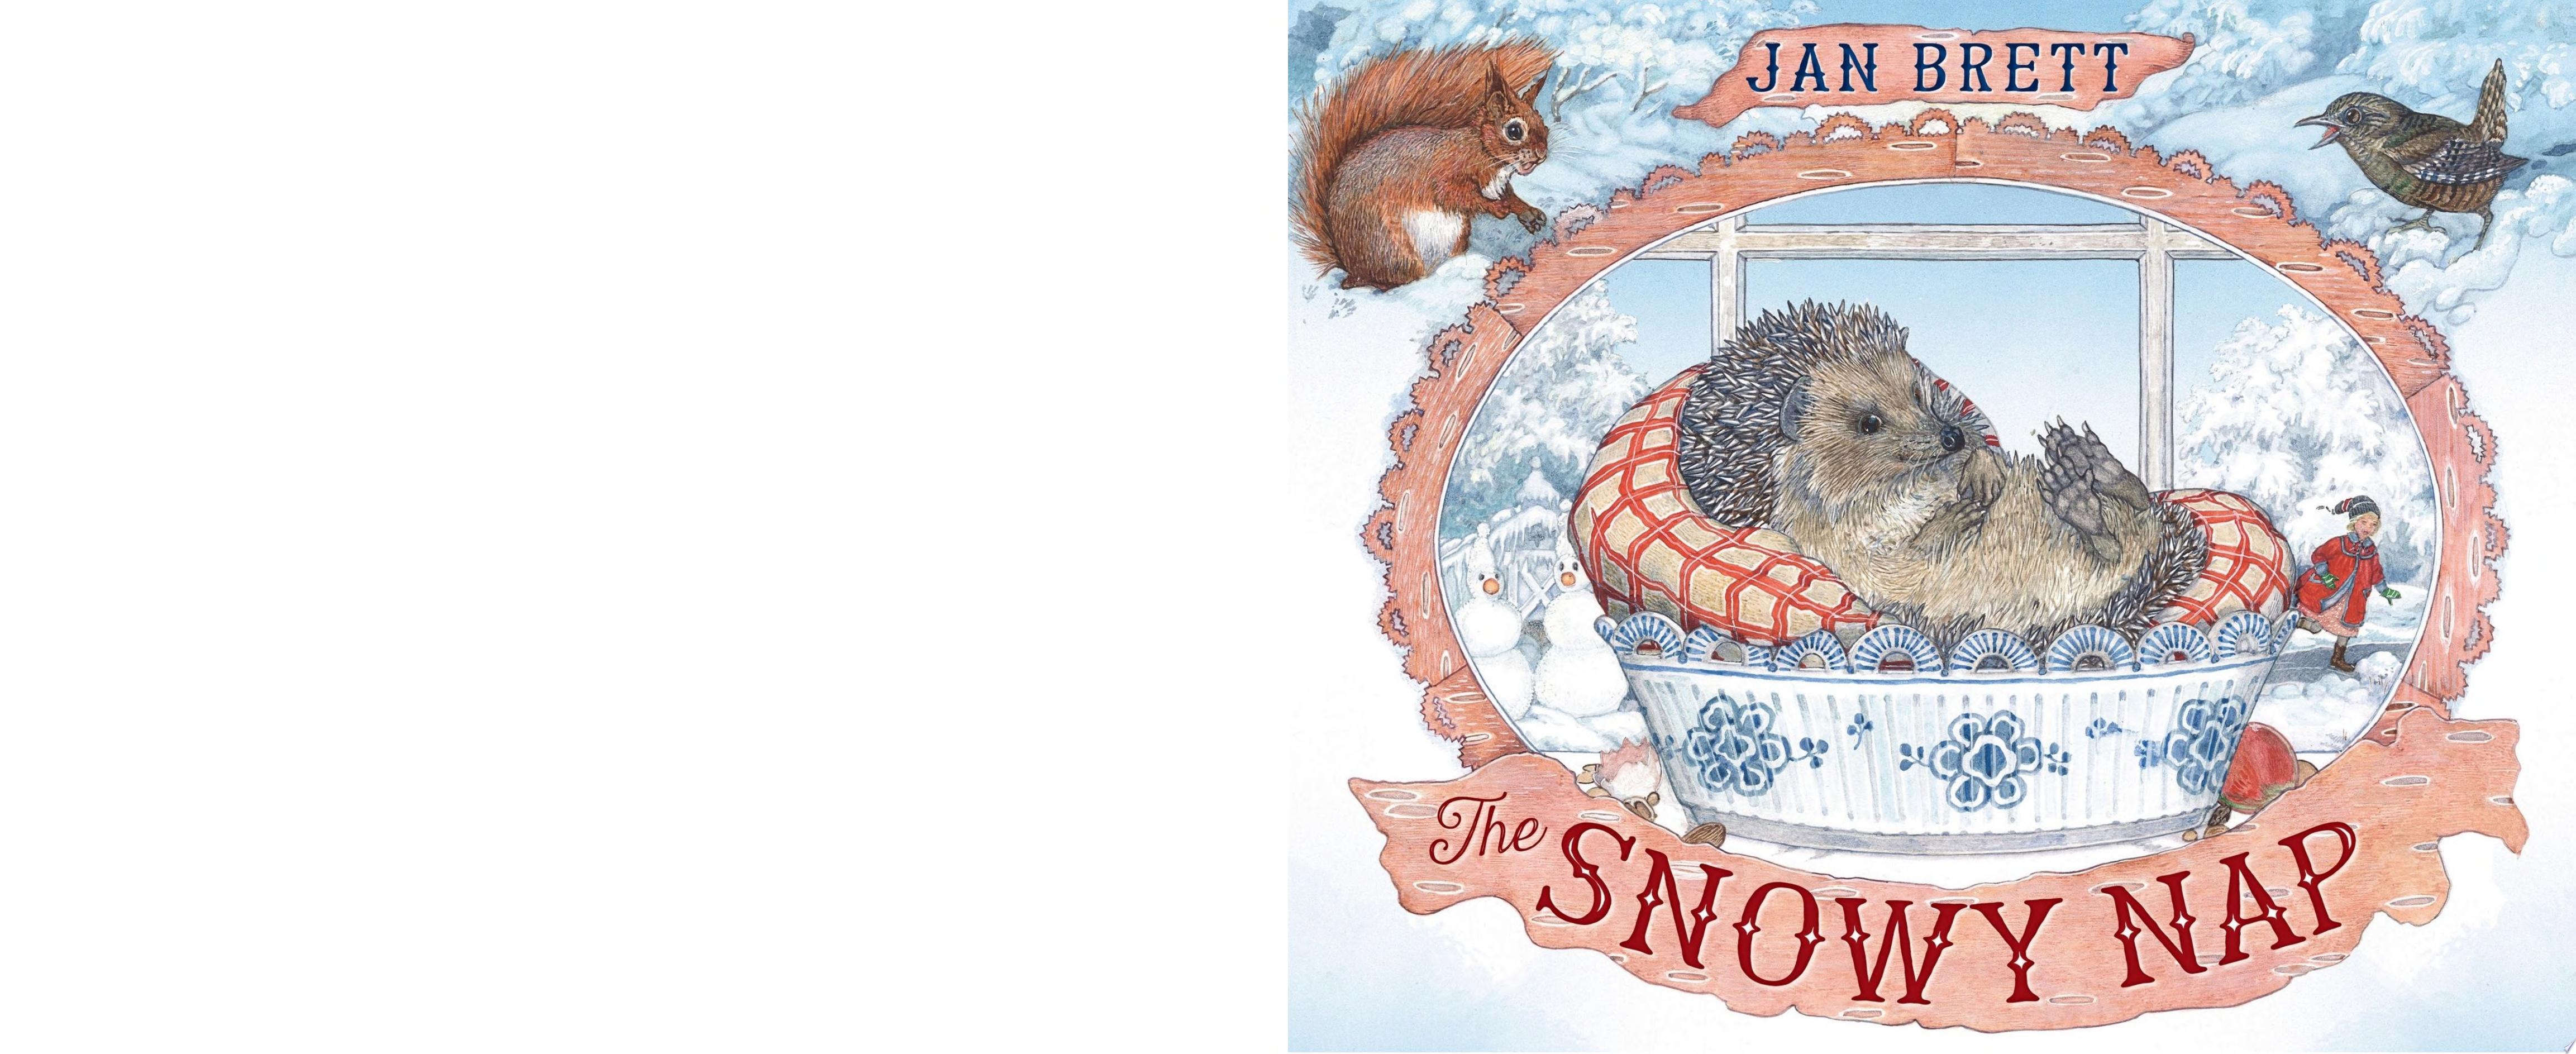 Image for "The Snowy Nap"